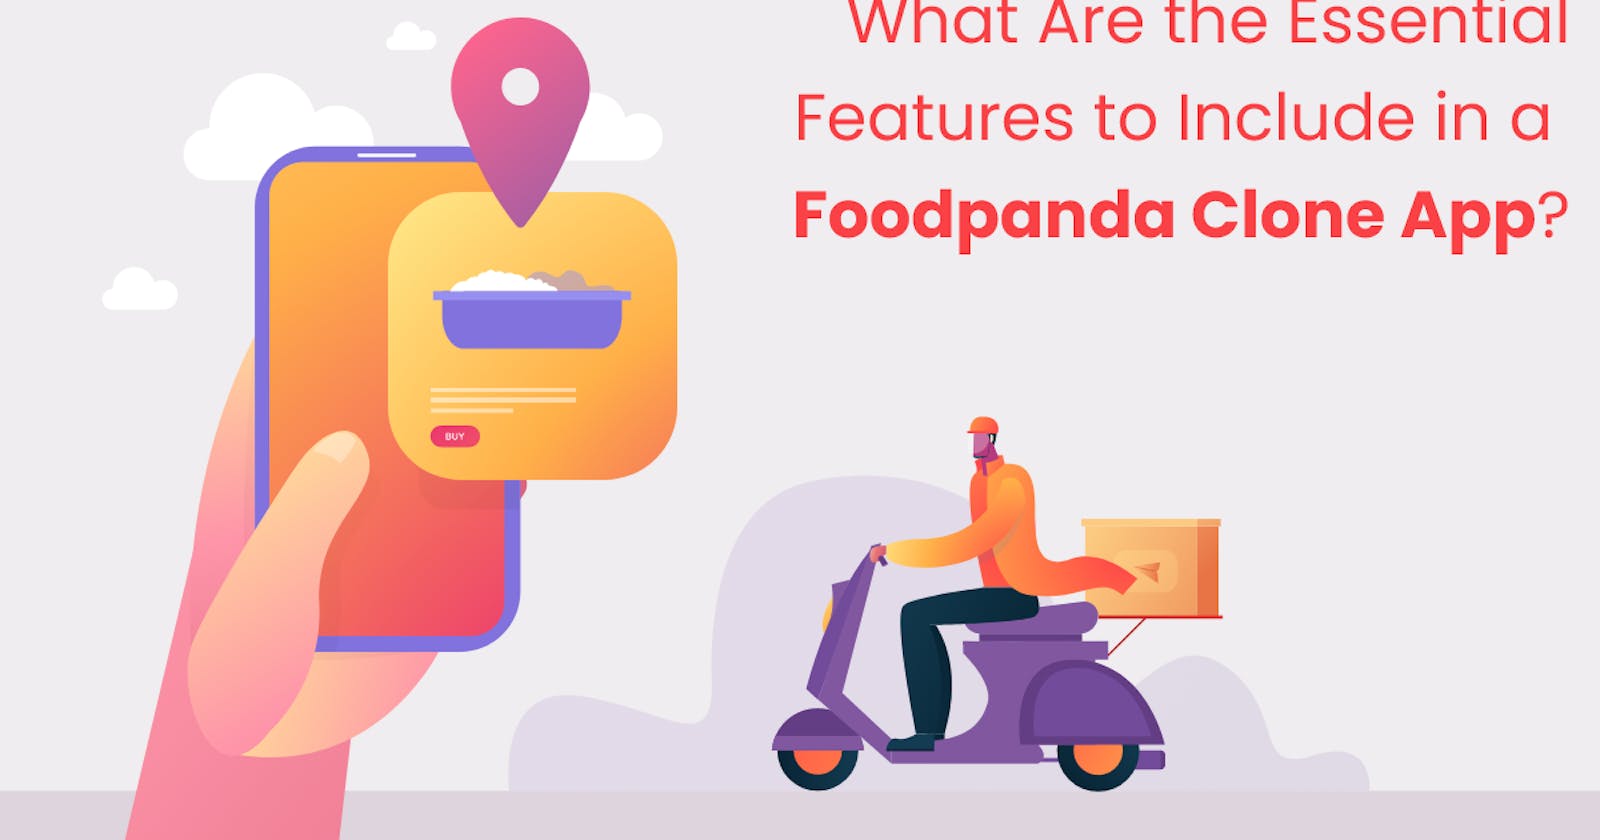 What are the Essential Features to Include in a FoodPanda Clone App?